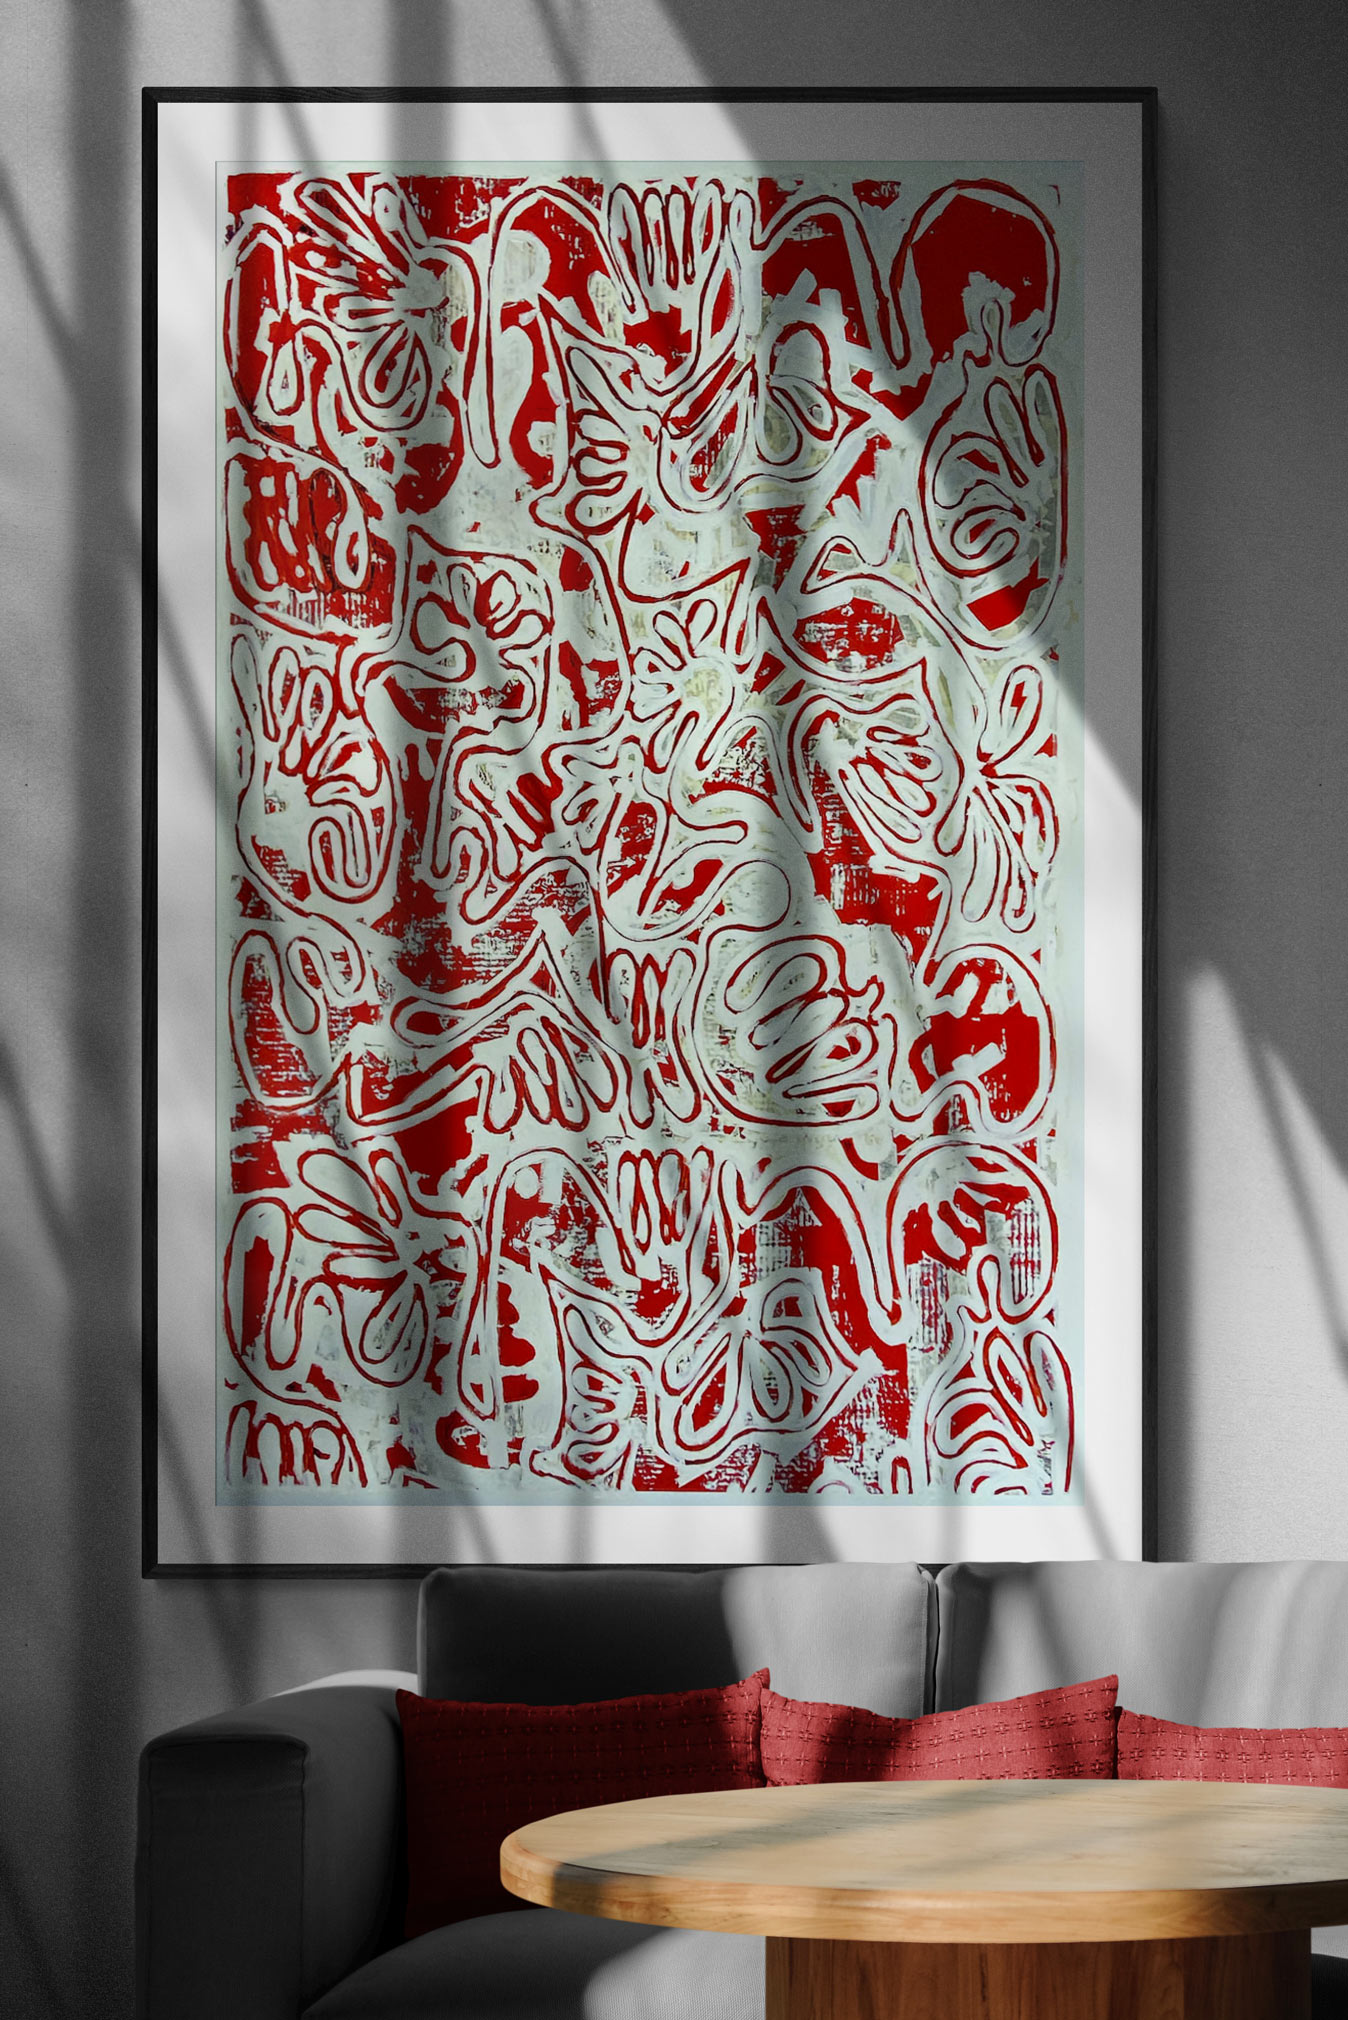 Robert Santoré “TAVARUA KAVA GHOSTS RED NO 2” Painting Size: 43 x 63in (109.22 x 160.02cm) Framed Size: 46 x 66in (116.84 x 167.64cm) Hand painted limited edition mono-print on the finest cold press archival acid free press 100% cotton rag paper with hand torn edges. Each one is slightly different and is an original on its own.